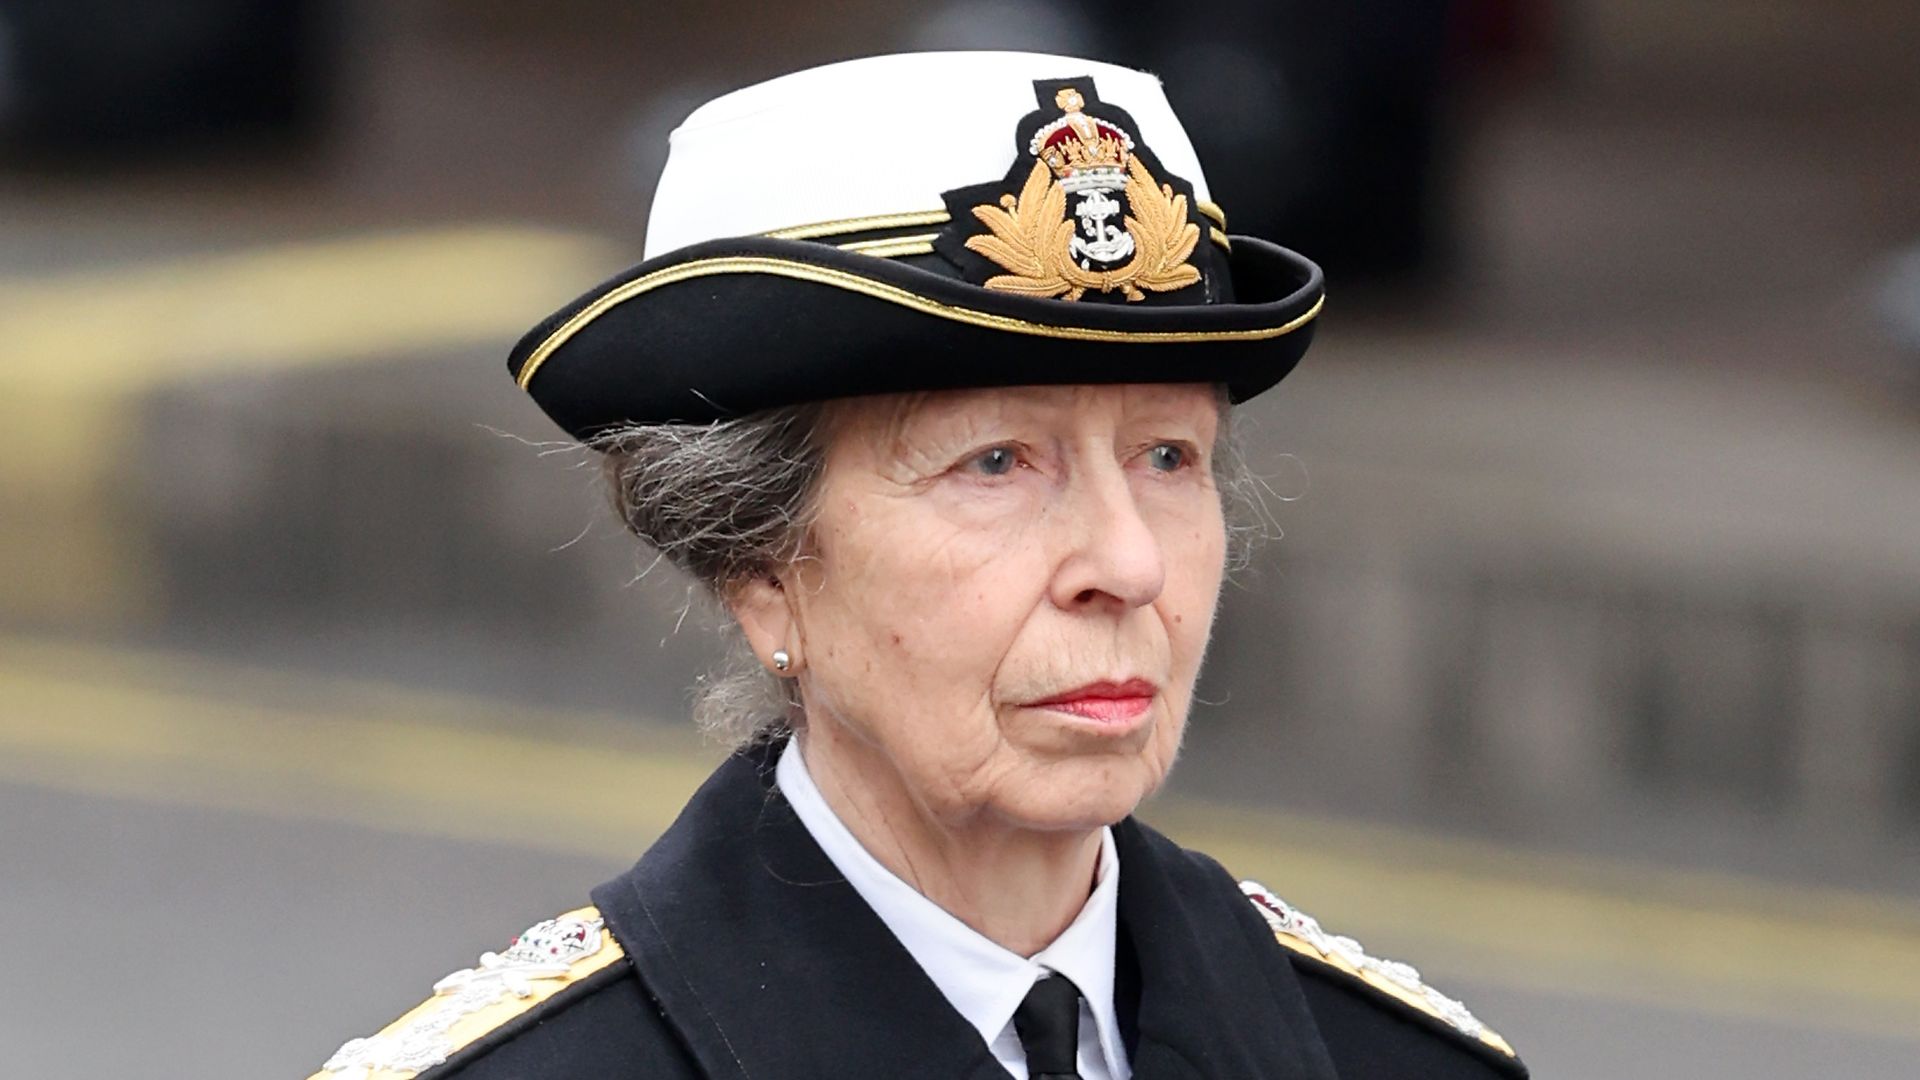 Princess Anne, Princess Royal during the National Service of Remembrance at The Cenotaph on November 12, 2023 in London, England. Every year, members of the British Royal family join politicians, veterans and members of the public to remember those who have died in combat